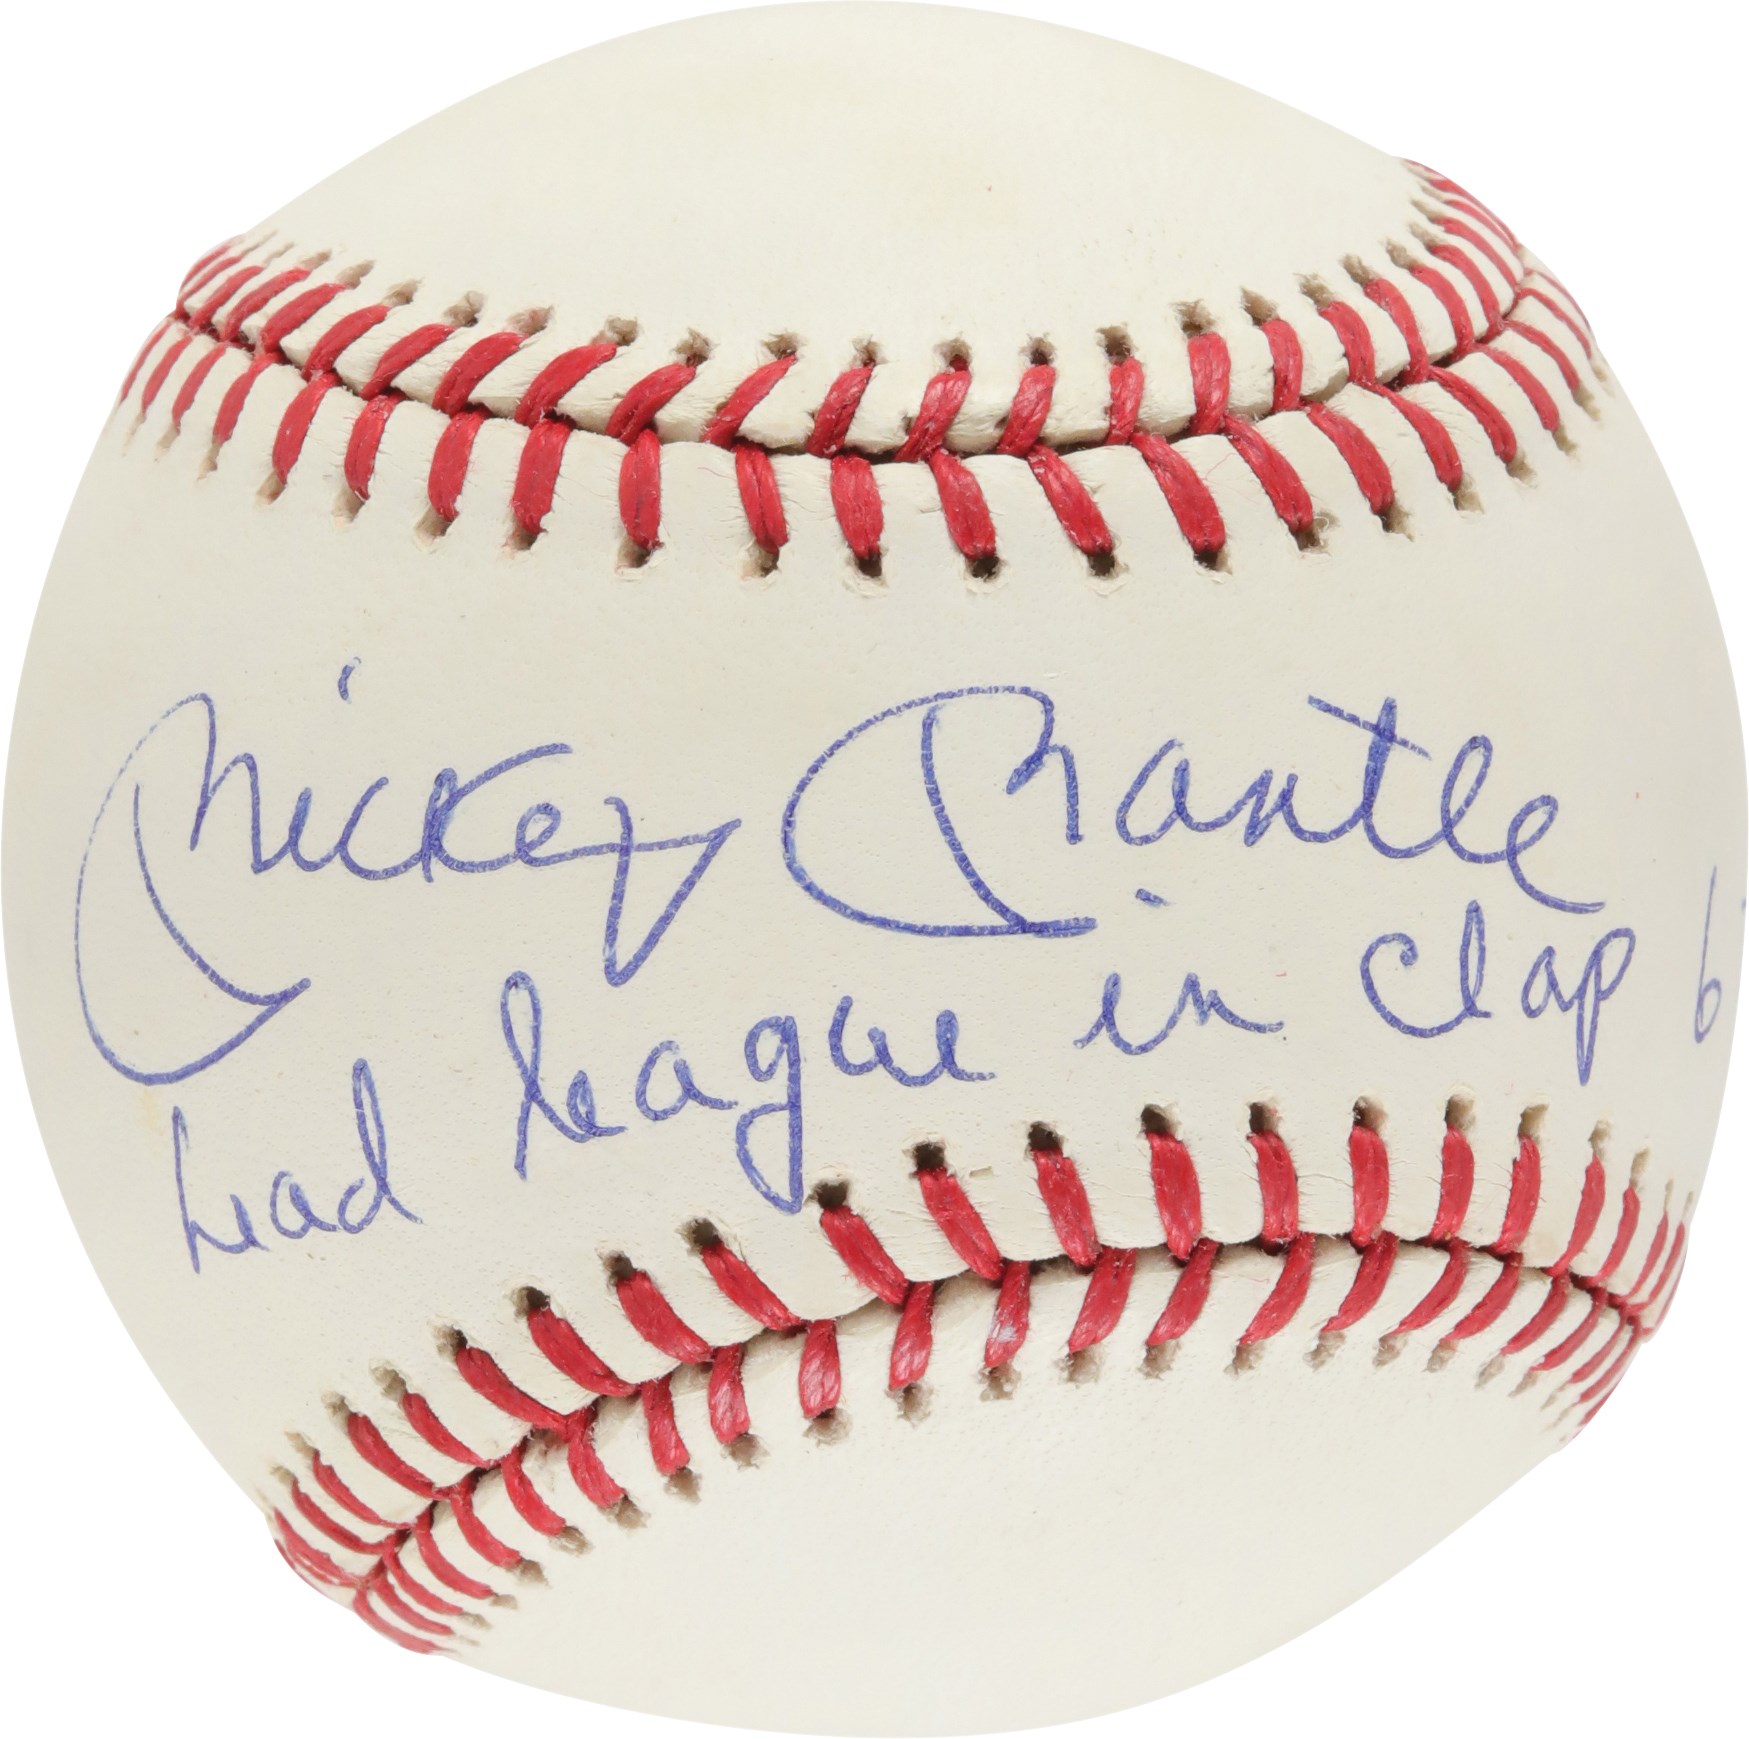 Baseball Autographs - Mickey Mantle "Lead the League in Clap 6 Times" Single-Signed Ball (PSA)